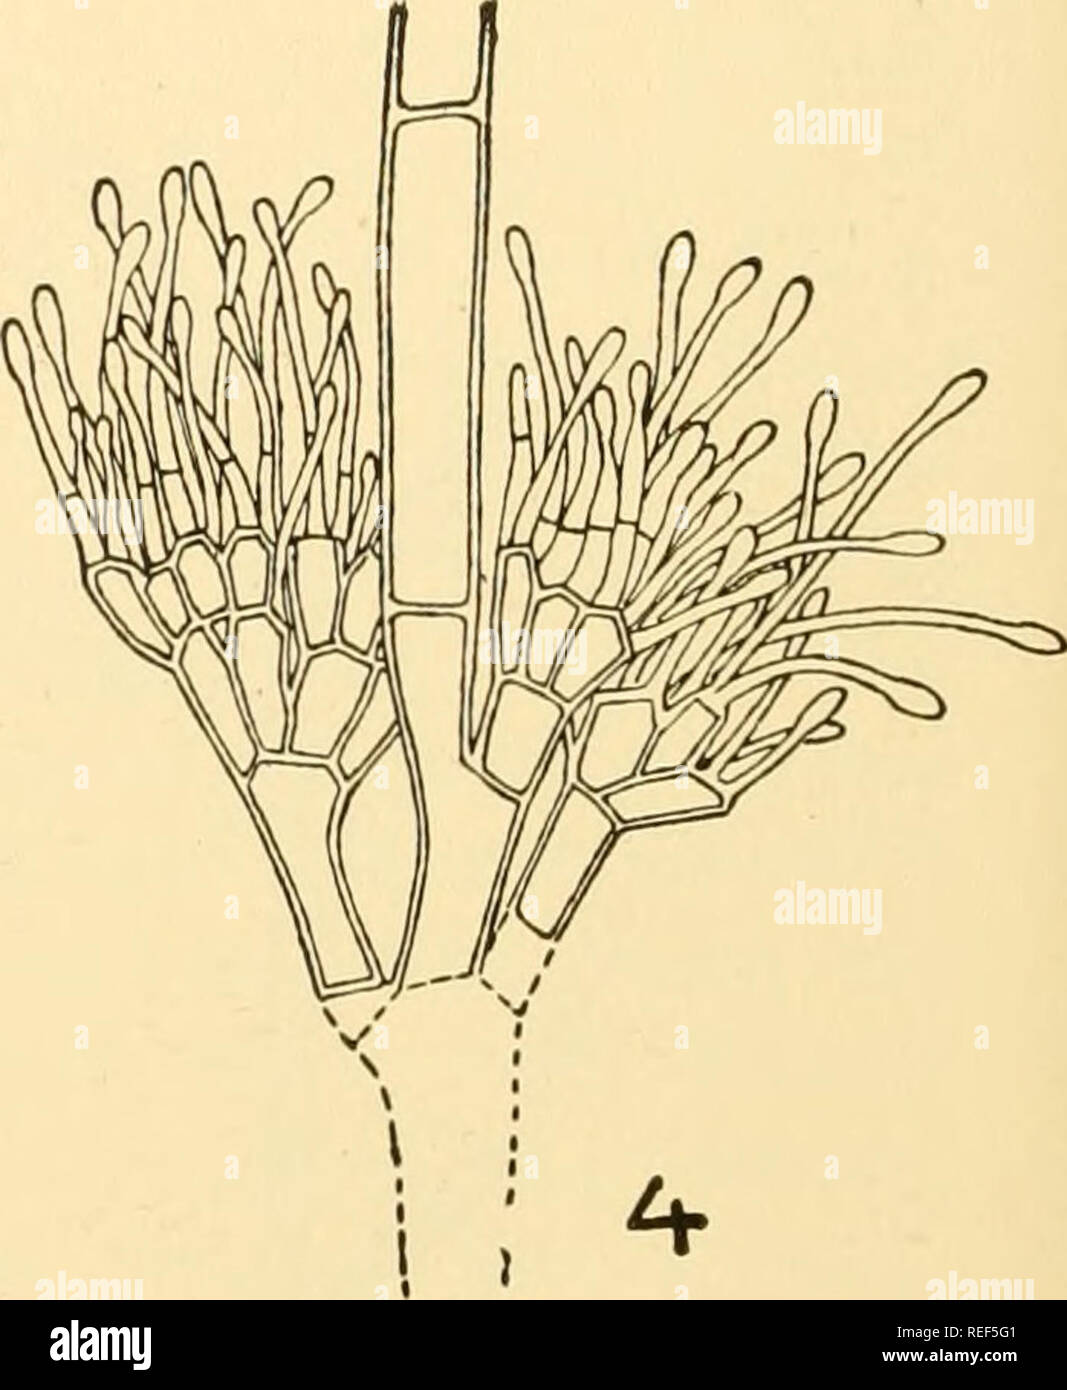 . Comparative morphology of Fungi. Fungi. &lt;^. L Fig. 405.—Volutella scopula. 1. Mature sporodochium. 2. Young sporodochium which has not started the production of conidia. 3. Conidia. A group of spores lie imbedded in a gel at the tips of the hyphae. 4. One of the large hyphae of the sporodo- chium and the conidiophores. (1 X 7; 2 X 30; 3, 4 X 780; after Boulanger, 1897.) new groups, for name and definition of which one should turn to the original. However much these forms may be justified in individual cases, one cannot avoid the impression that the Fungi Imperfecti are better off the less Stock Photo